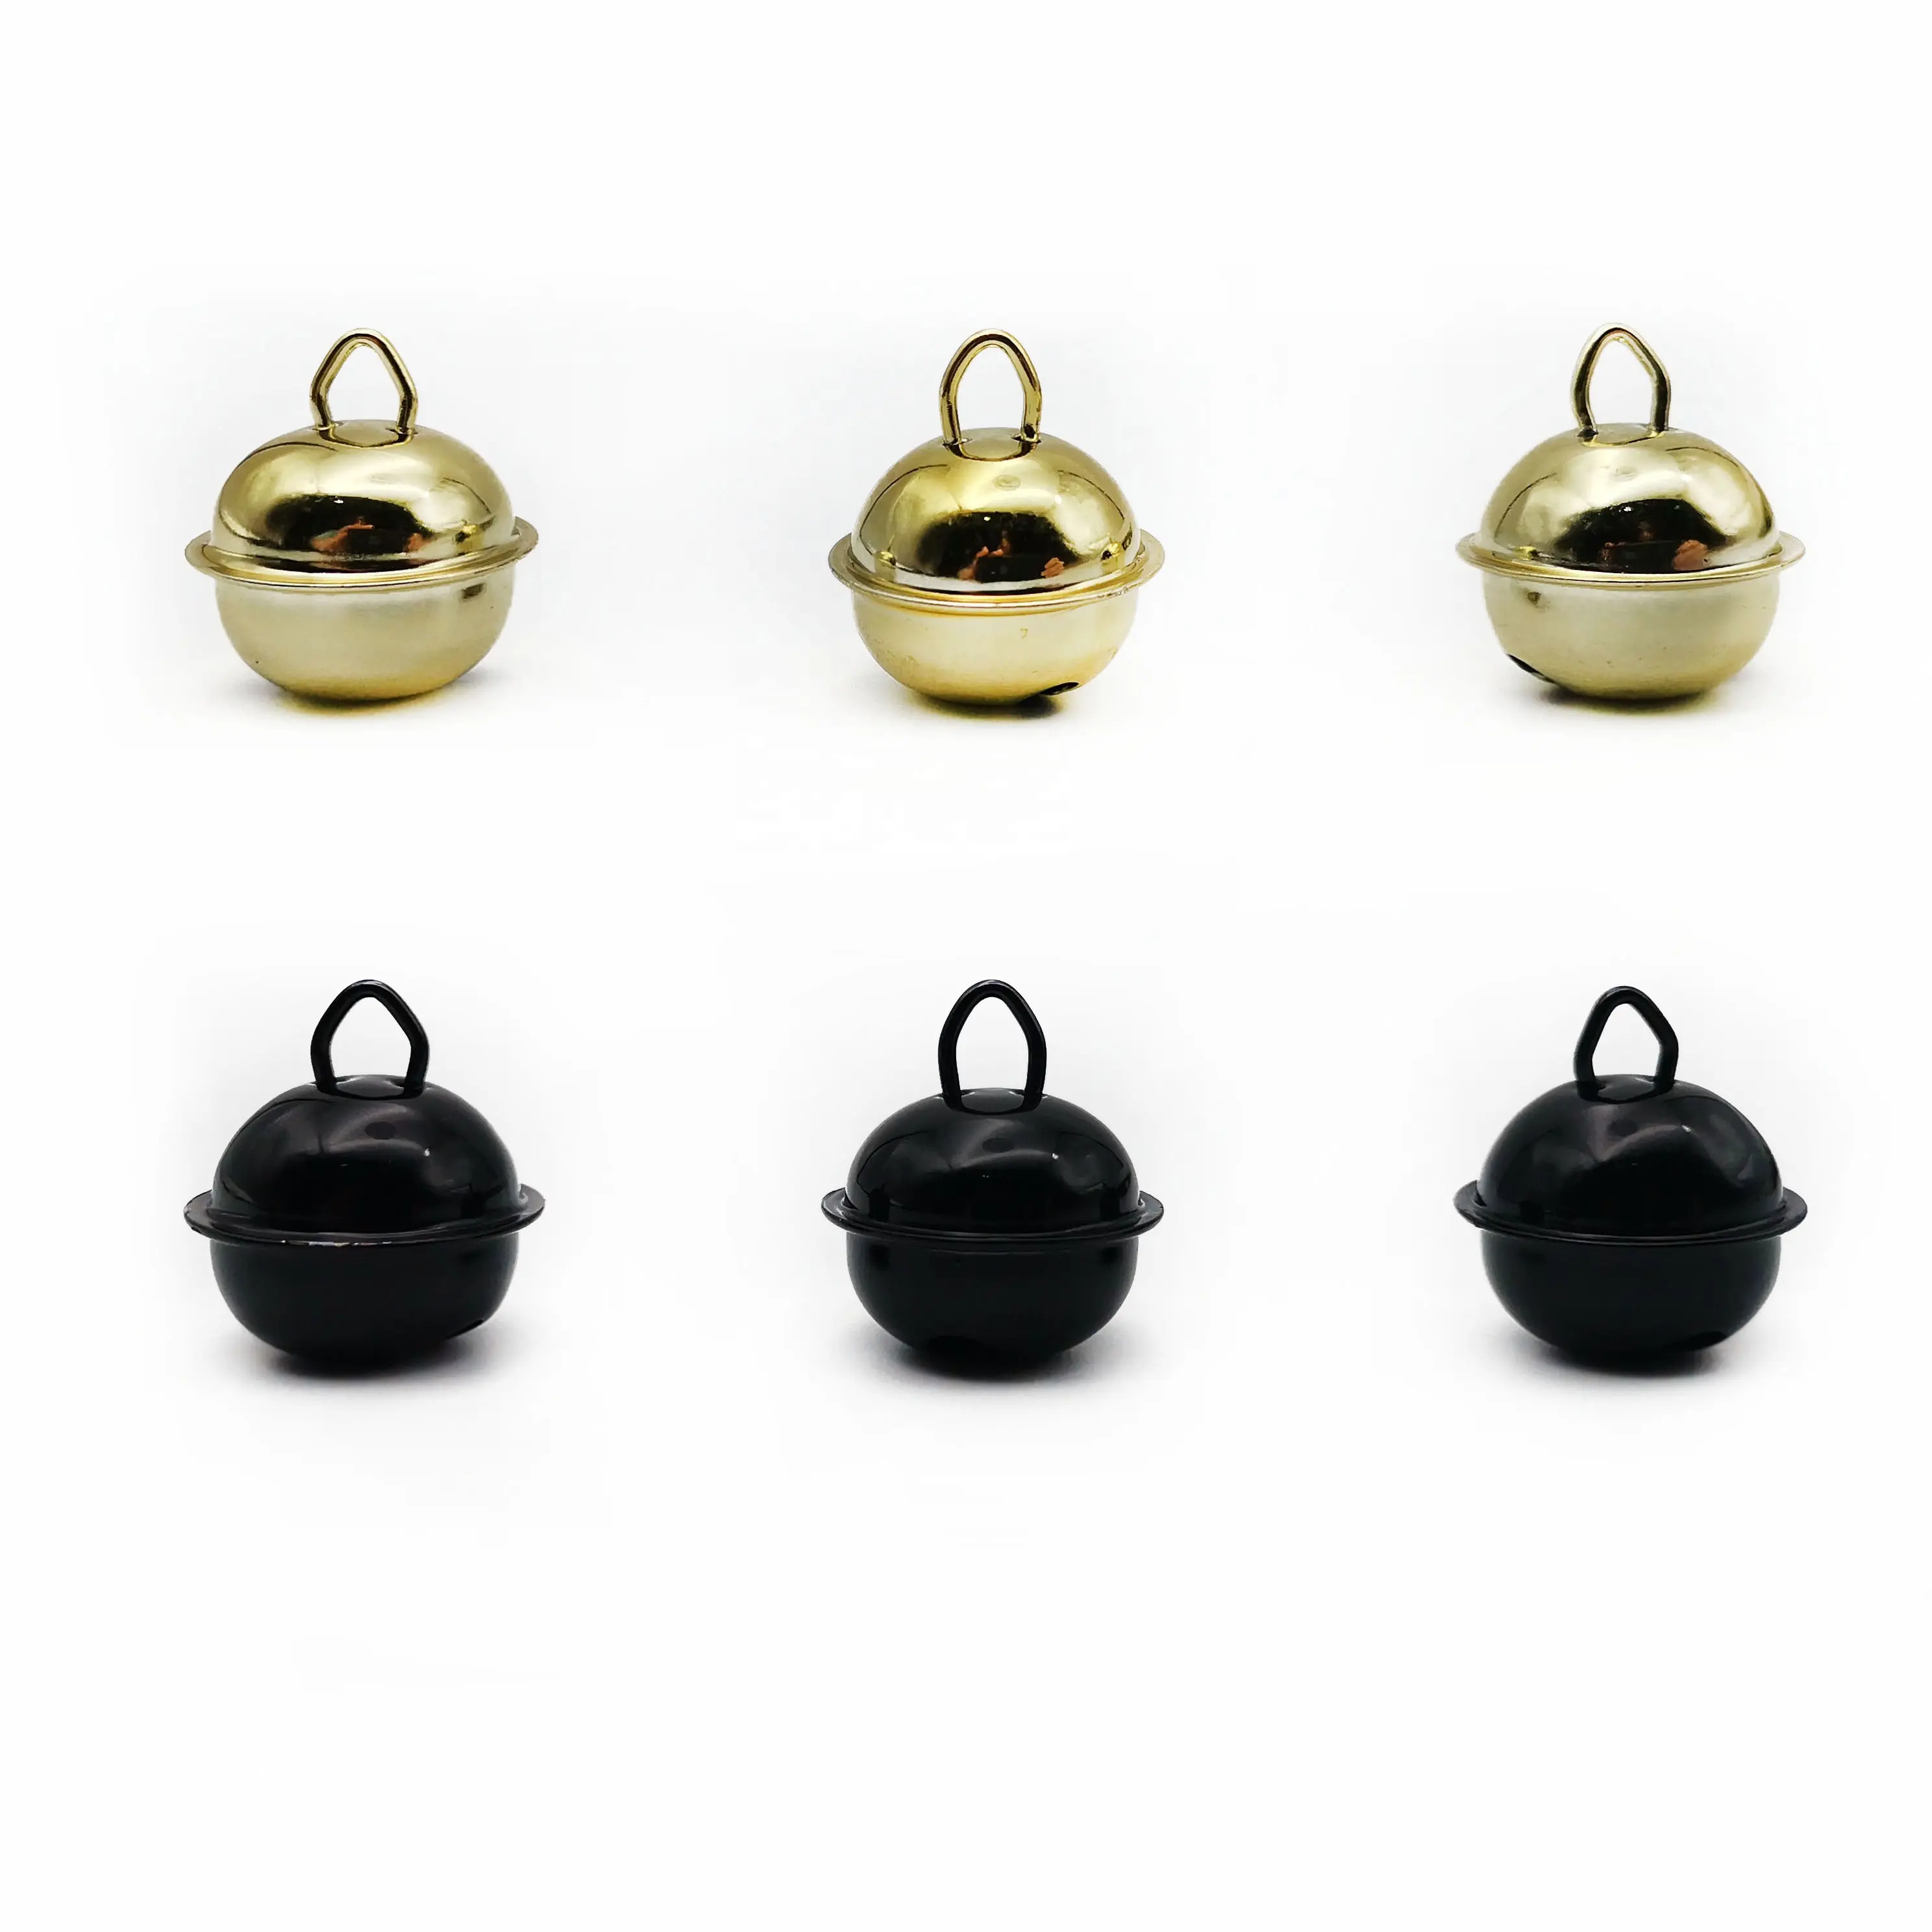 Wholesale Brass Black Bell For Christmas Decorations Holiday Party Metal Brass Bell